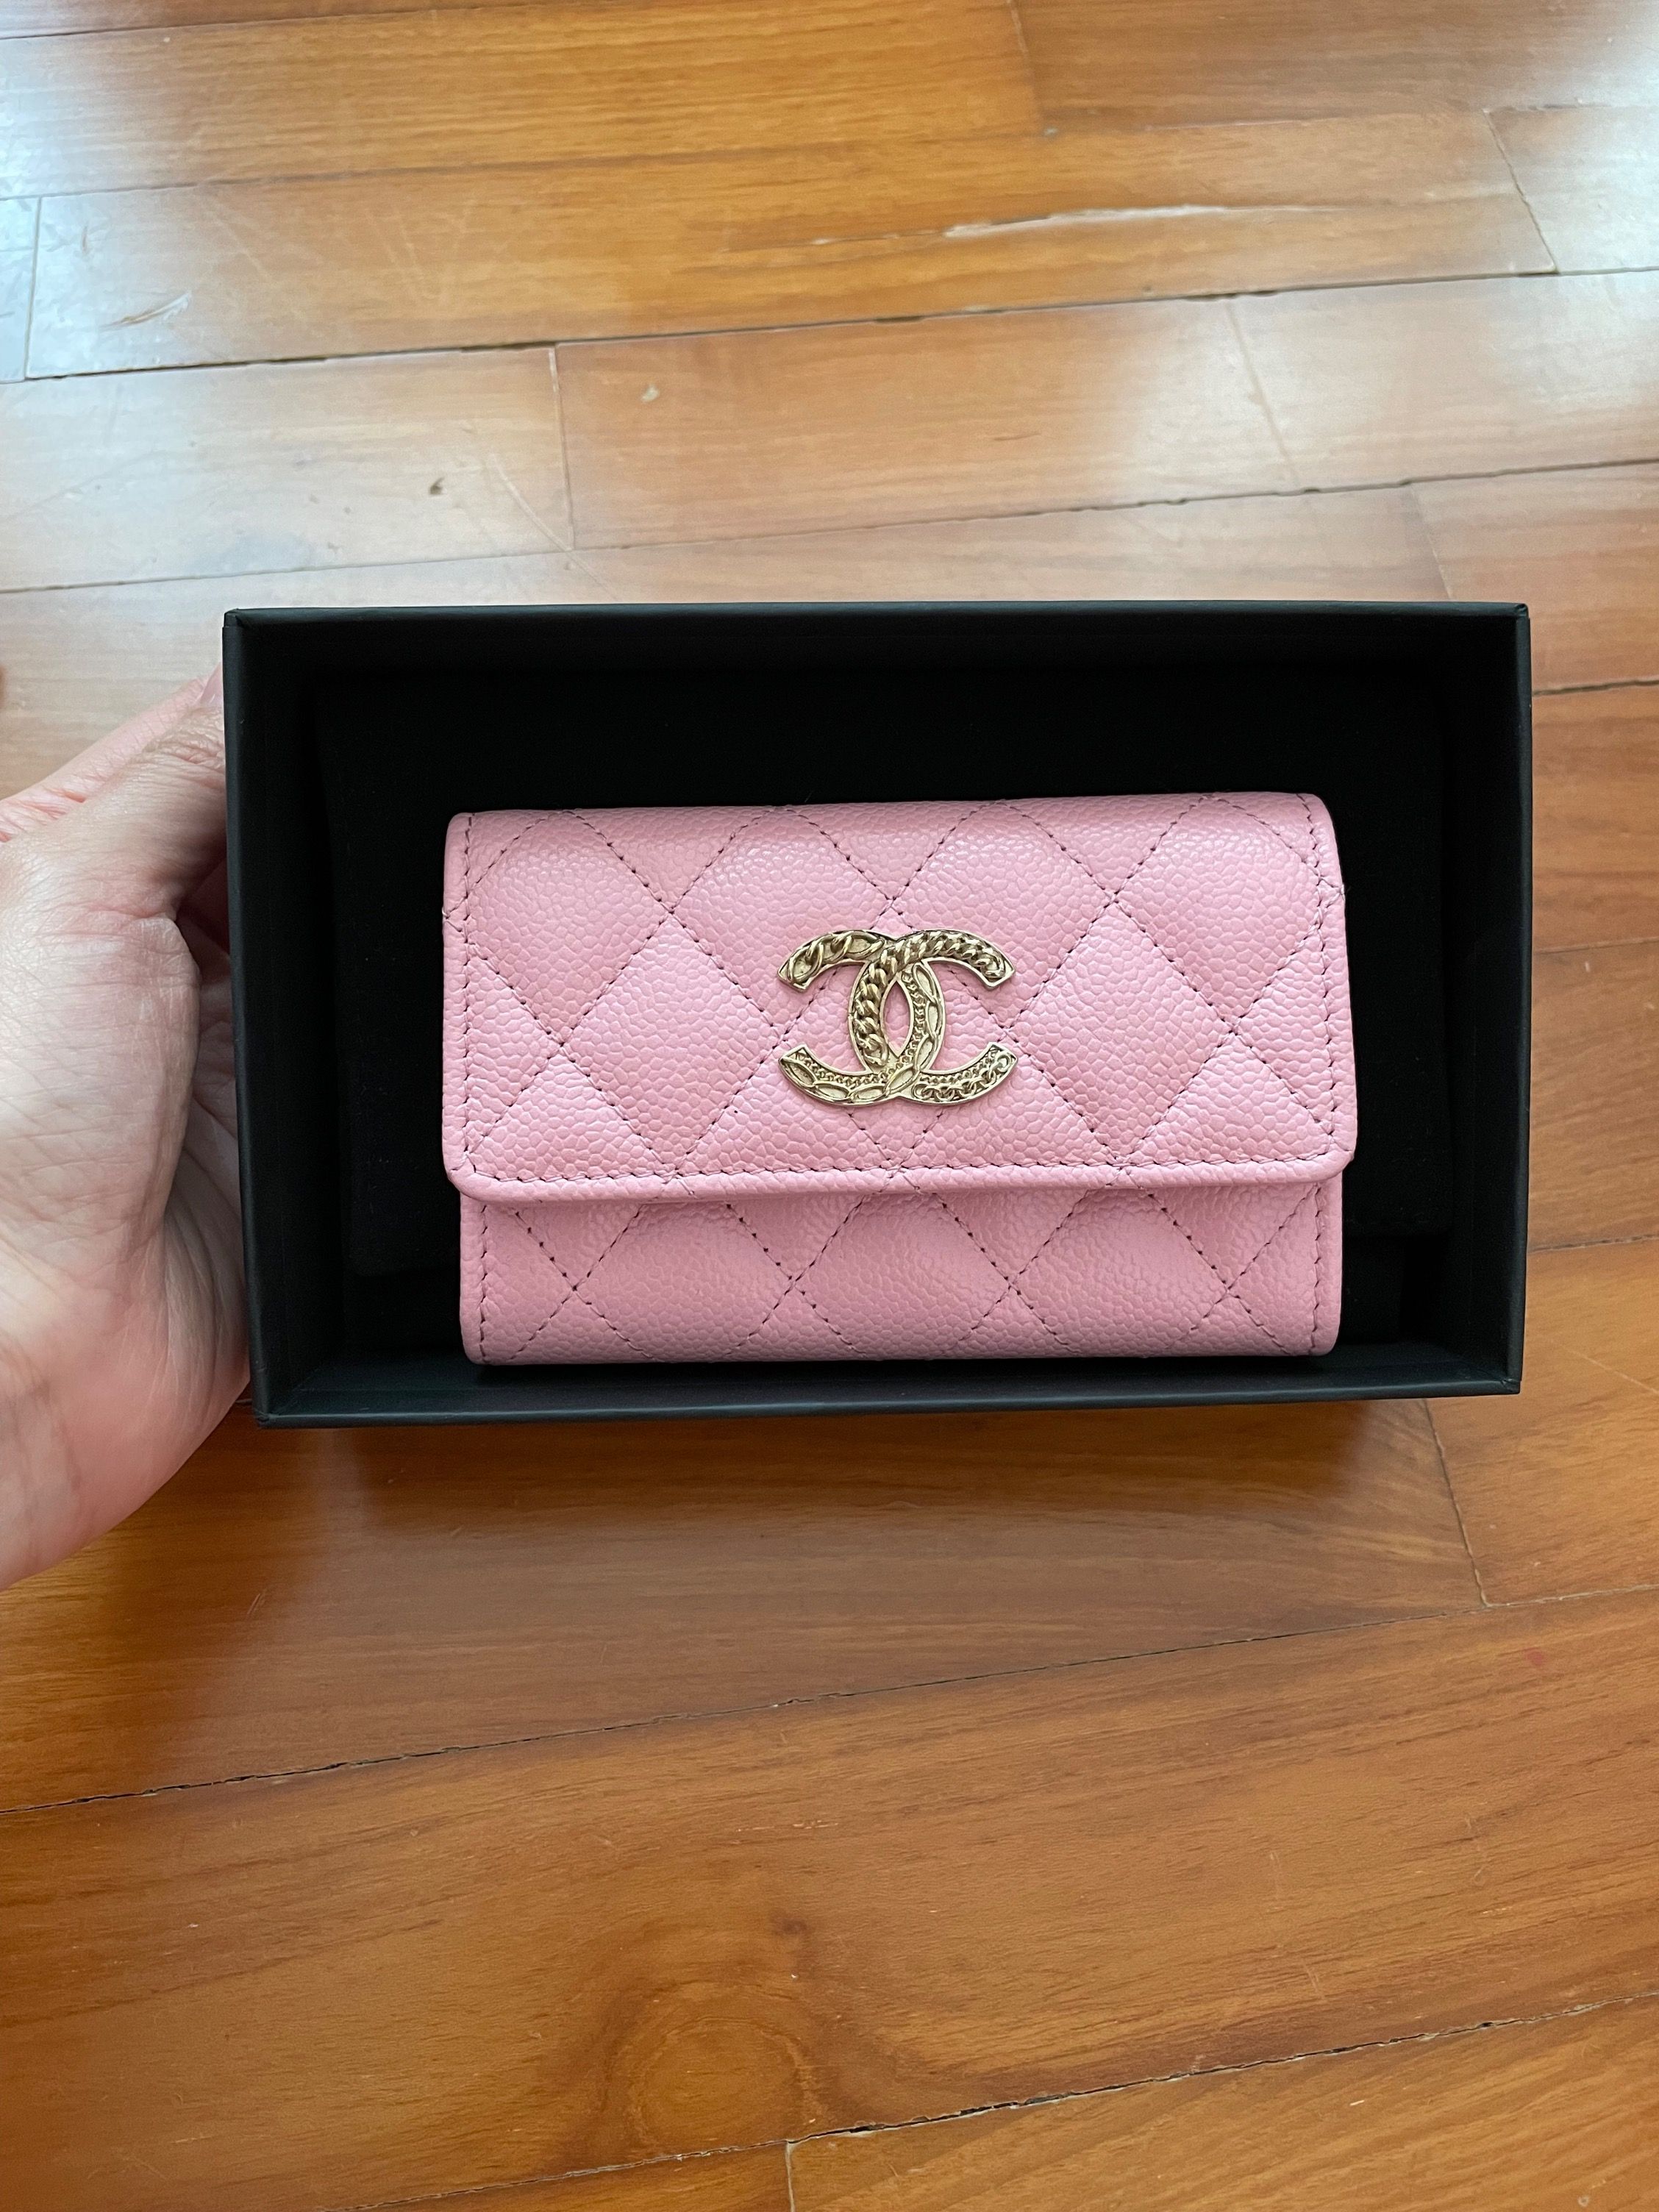 CHANEL 19S Iridescent Pink Flap Card Holder *New - Timeless Luxuries